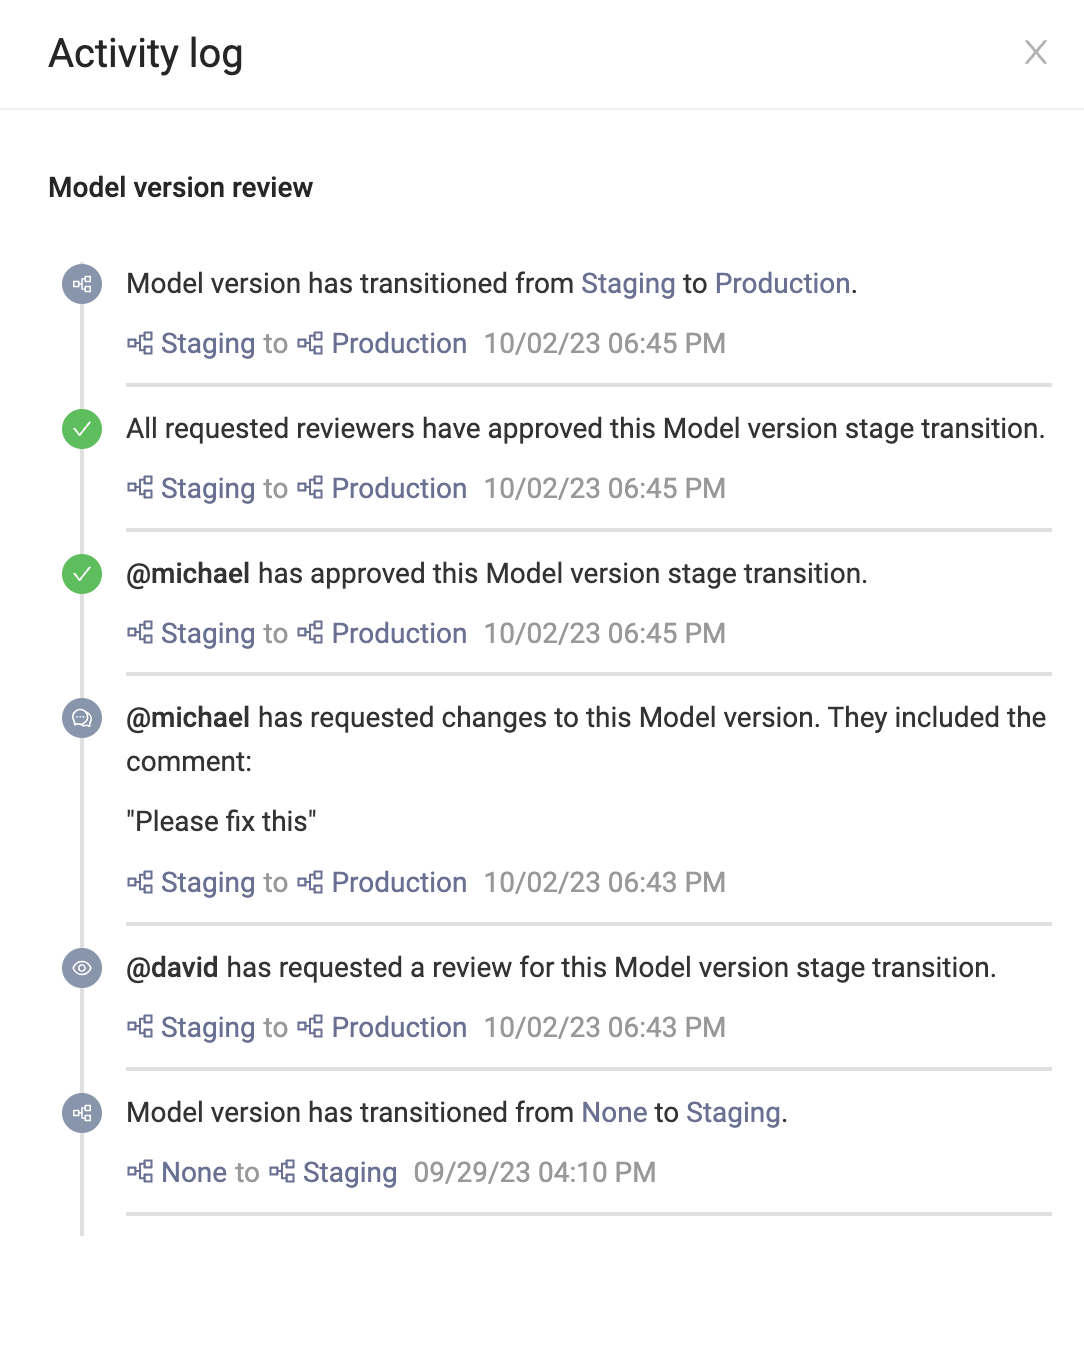 see a model version’s review activity